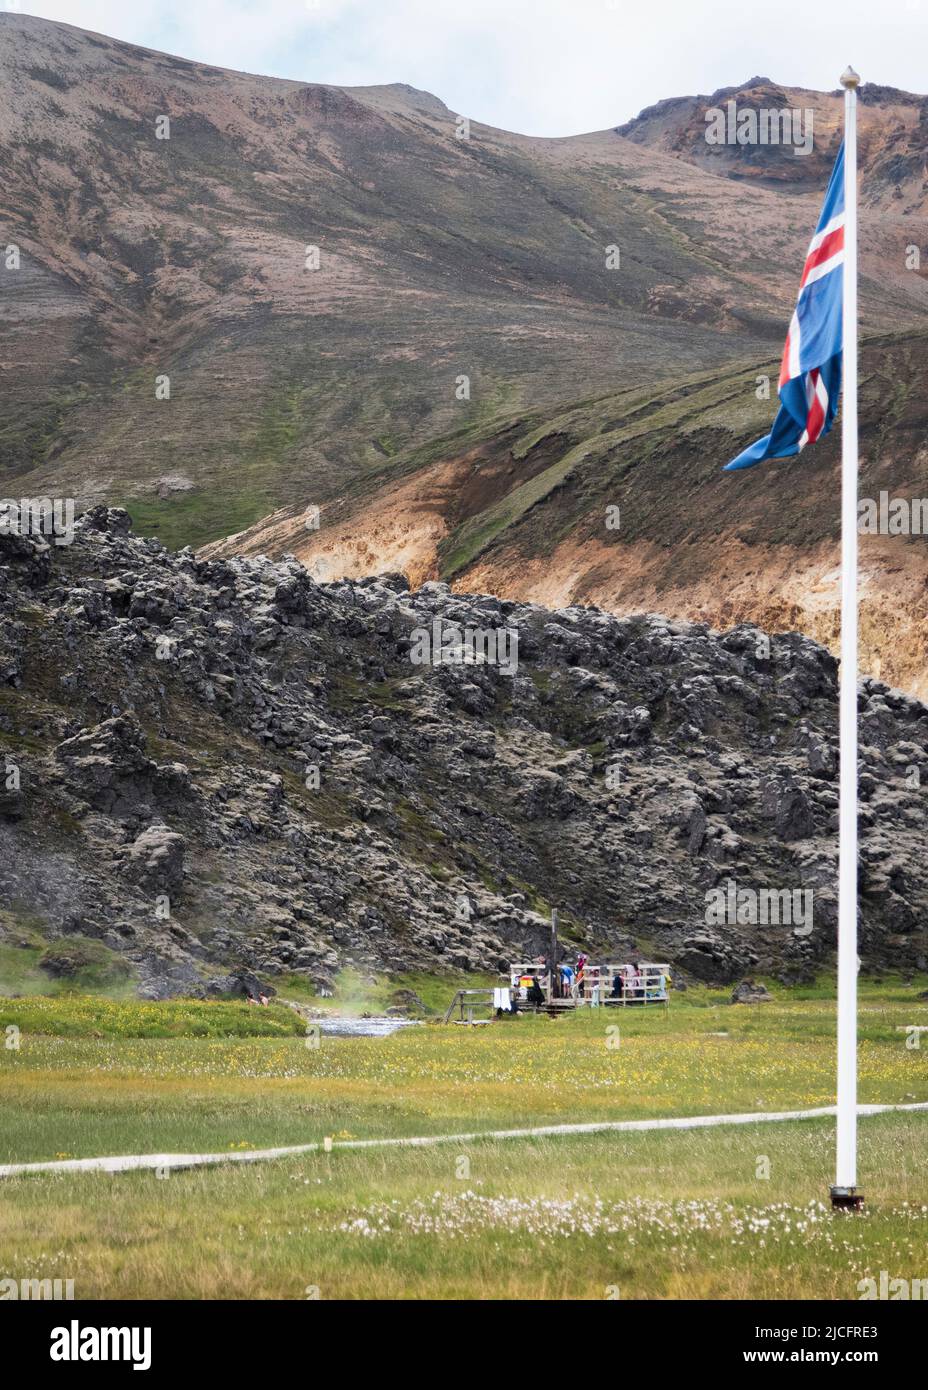 Laugavegur hiking trail is the most famous multi-day trekking tour in Iceland. Landscape shot from the area around Landmannalaugar, starting point of the long-distance hiking trail in the highlands of Iceland. Icelandic flag at the hot pot Stock Photo